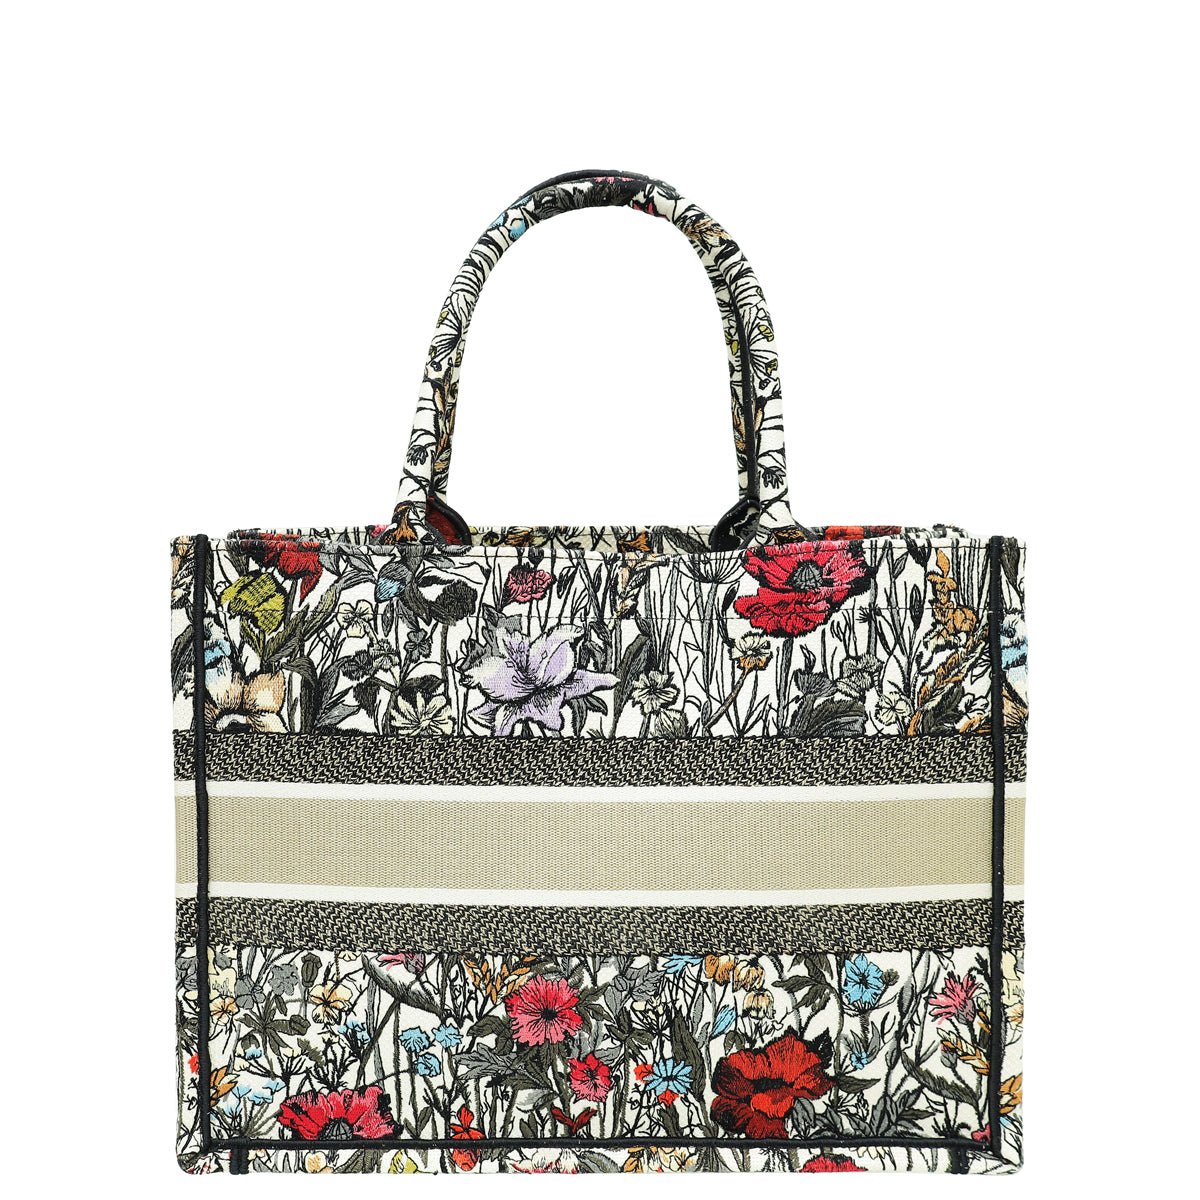 Christian Dior White Multicolor Embroidered Mille Fleurs Book Tote Medium Bag w/Twillies